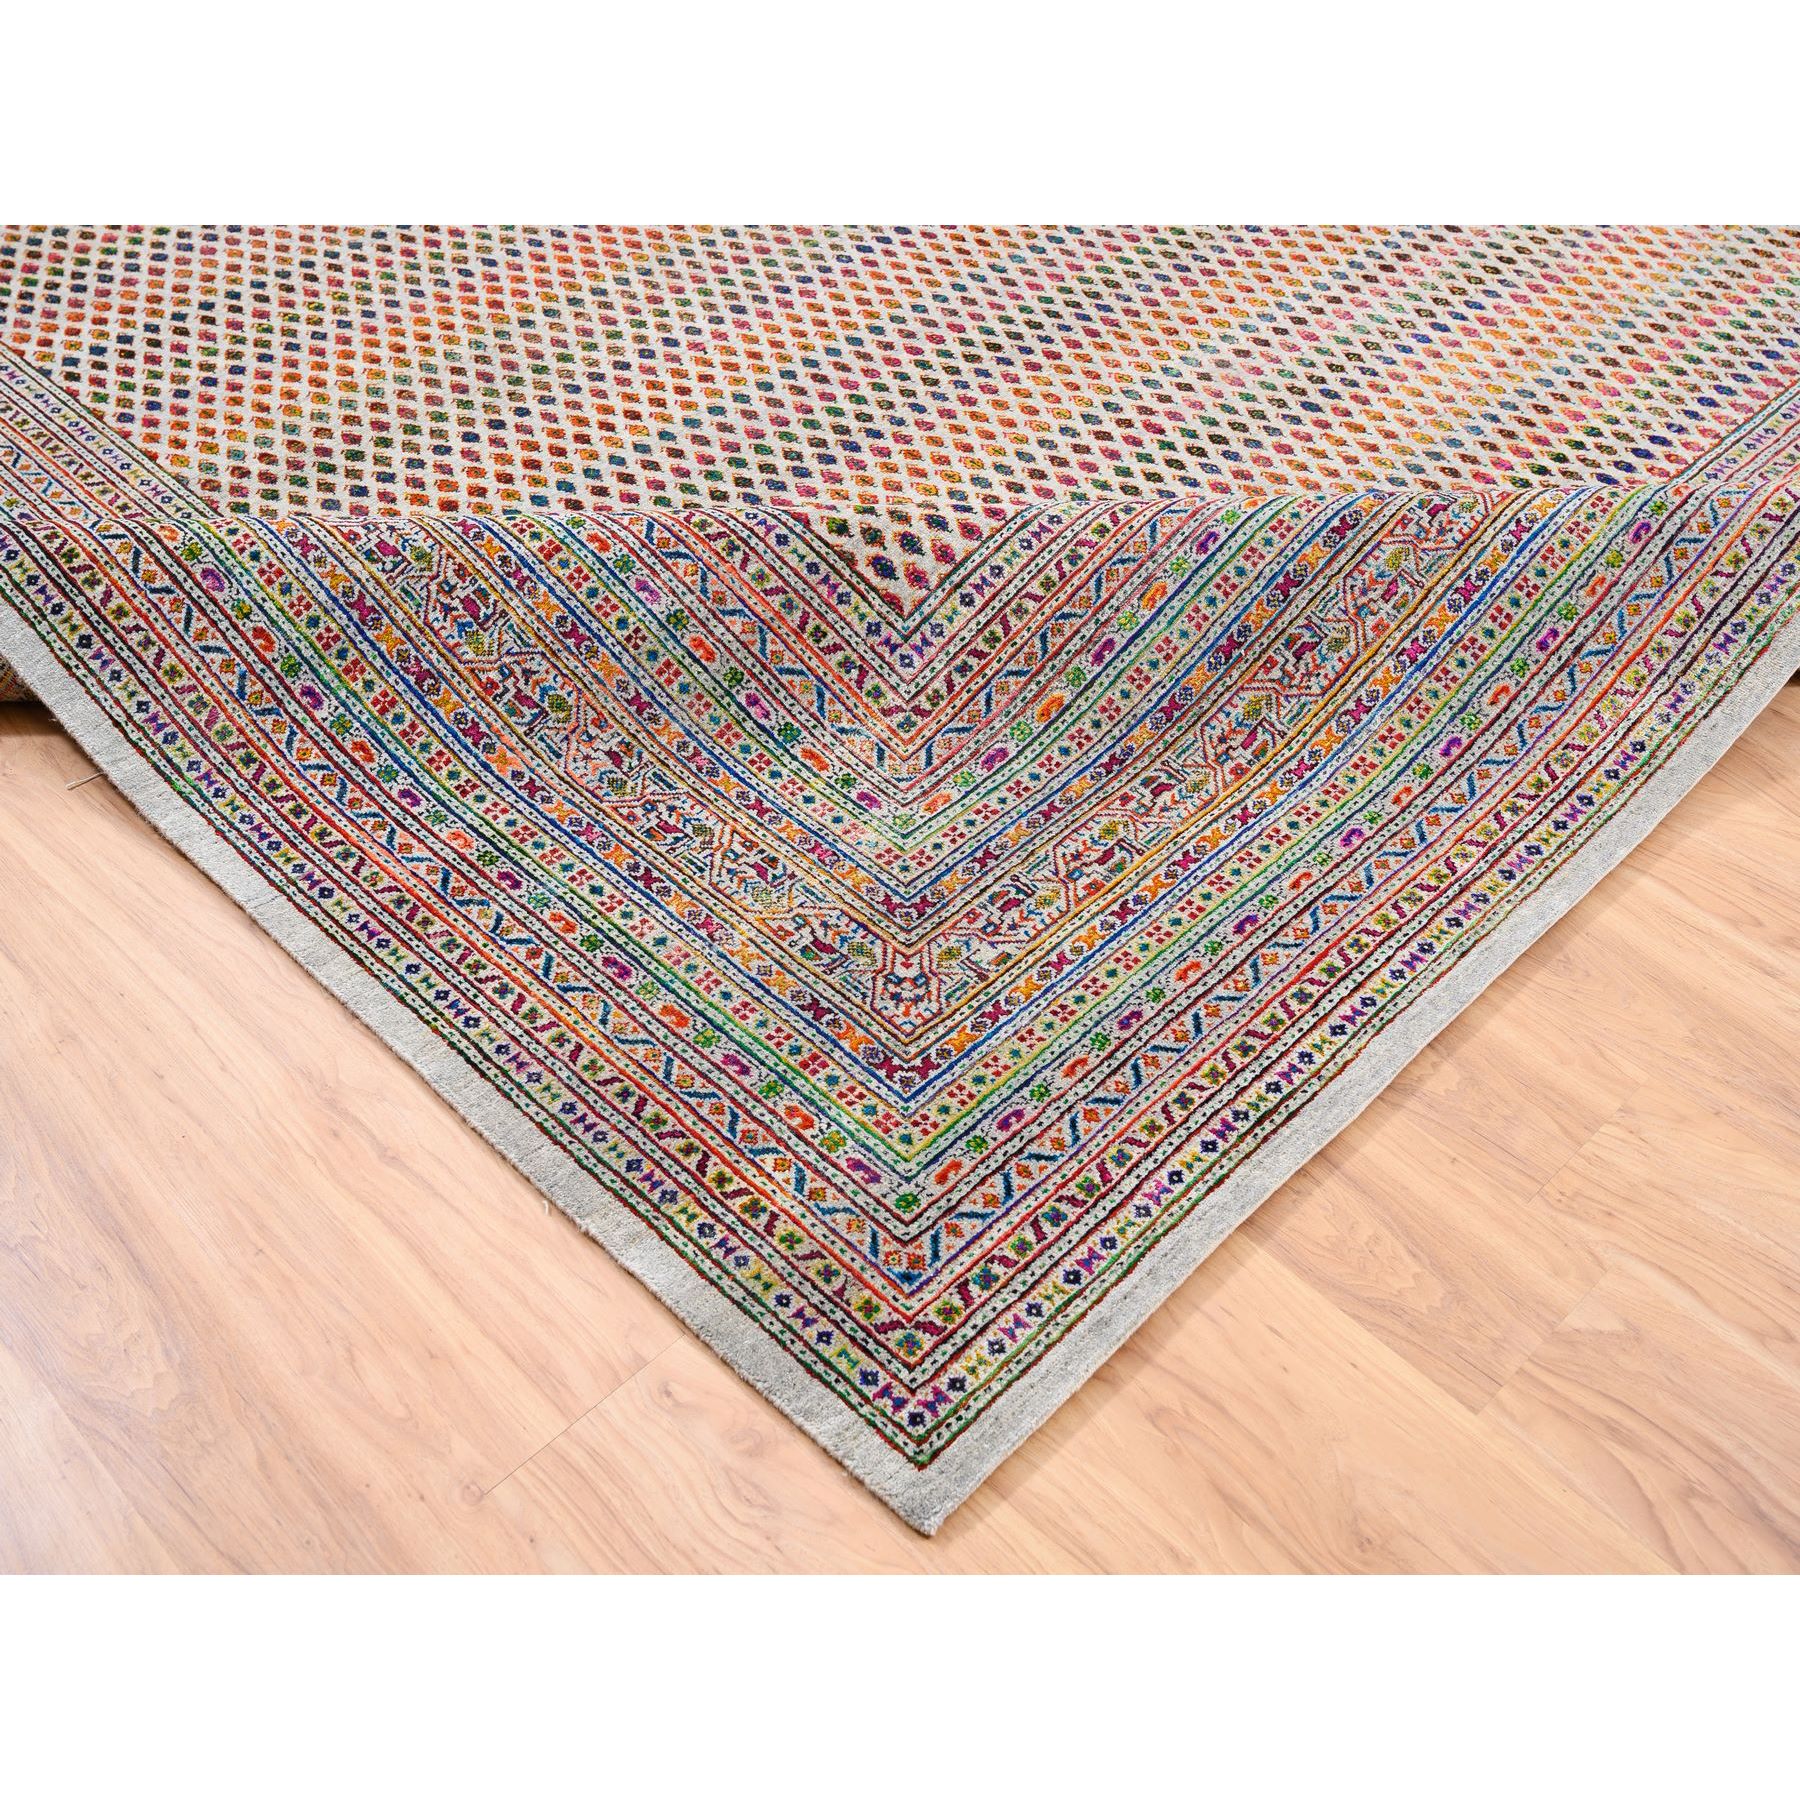 12'x12' Colorful Wool And Sari Silk Sarouk Mir Inspired With Repetitive Boteh Design Hand Woven Oriental Square Rug 